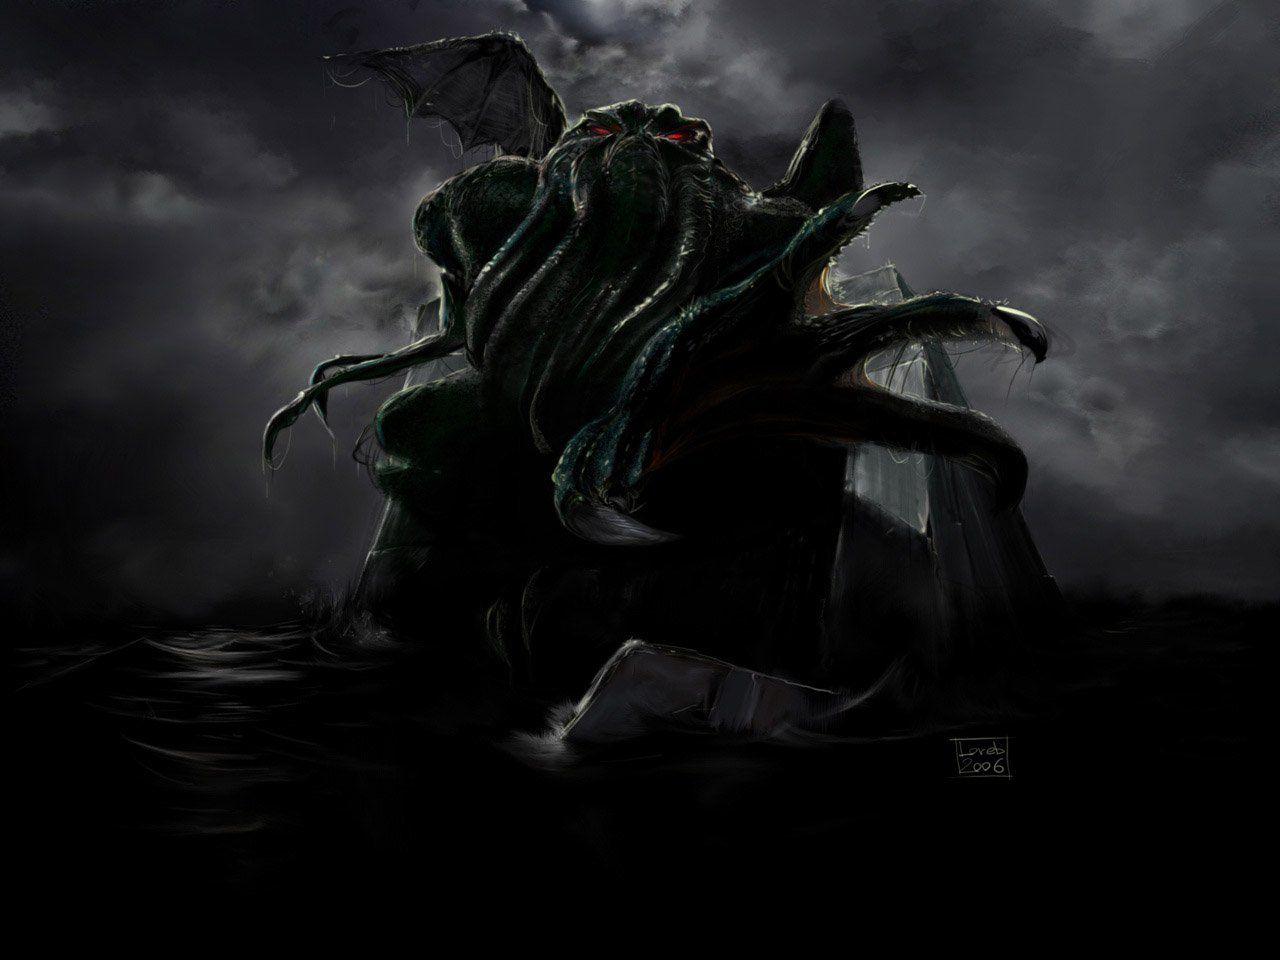 Download Scary Monster Wallpaper, Picture, Photo and Background. Cthulhu, Lovecraft, Scary wallpaper